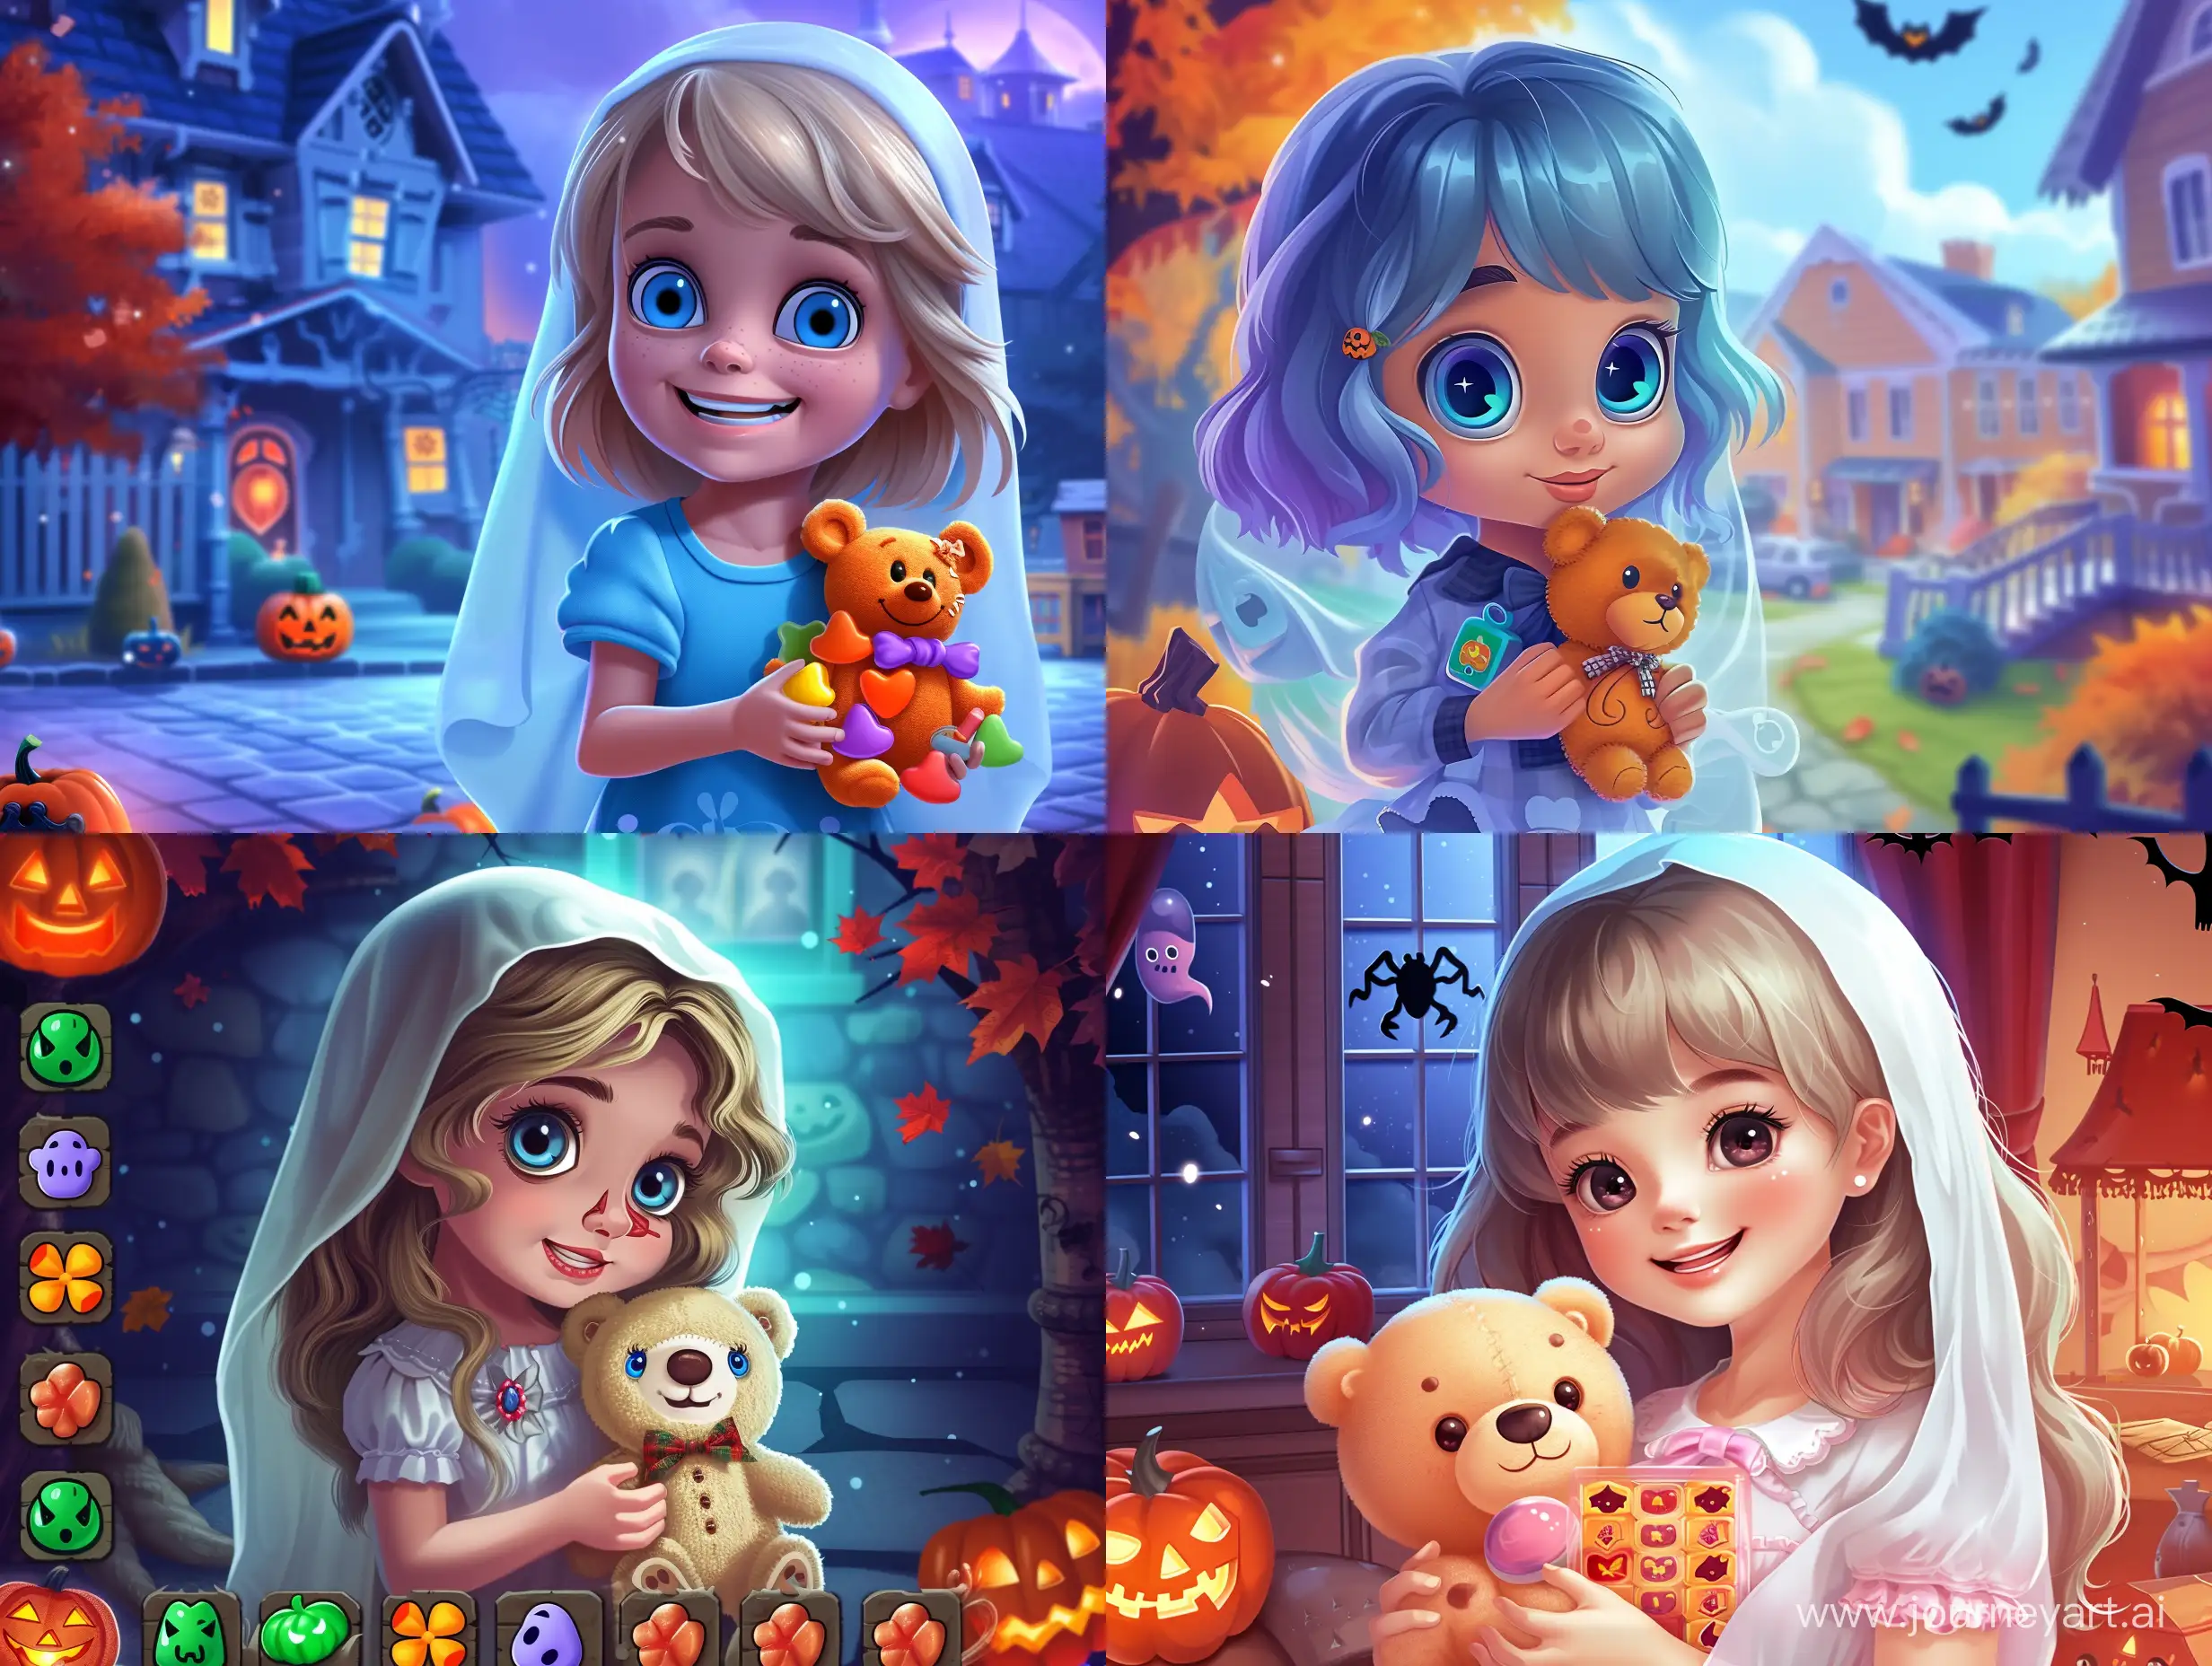 match-3 game screensaver in halloween theme with a ghost girl holding plush toy-bear